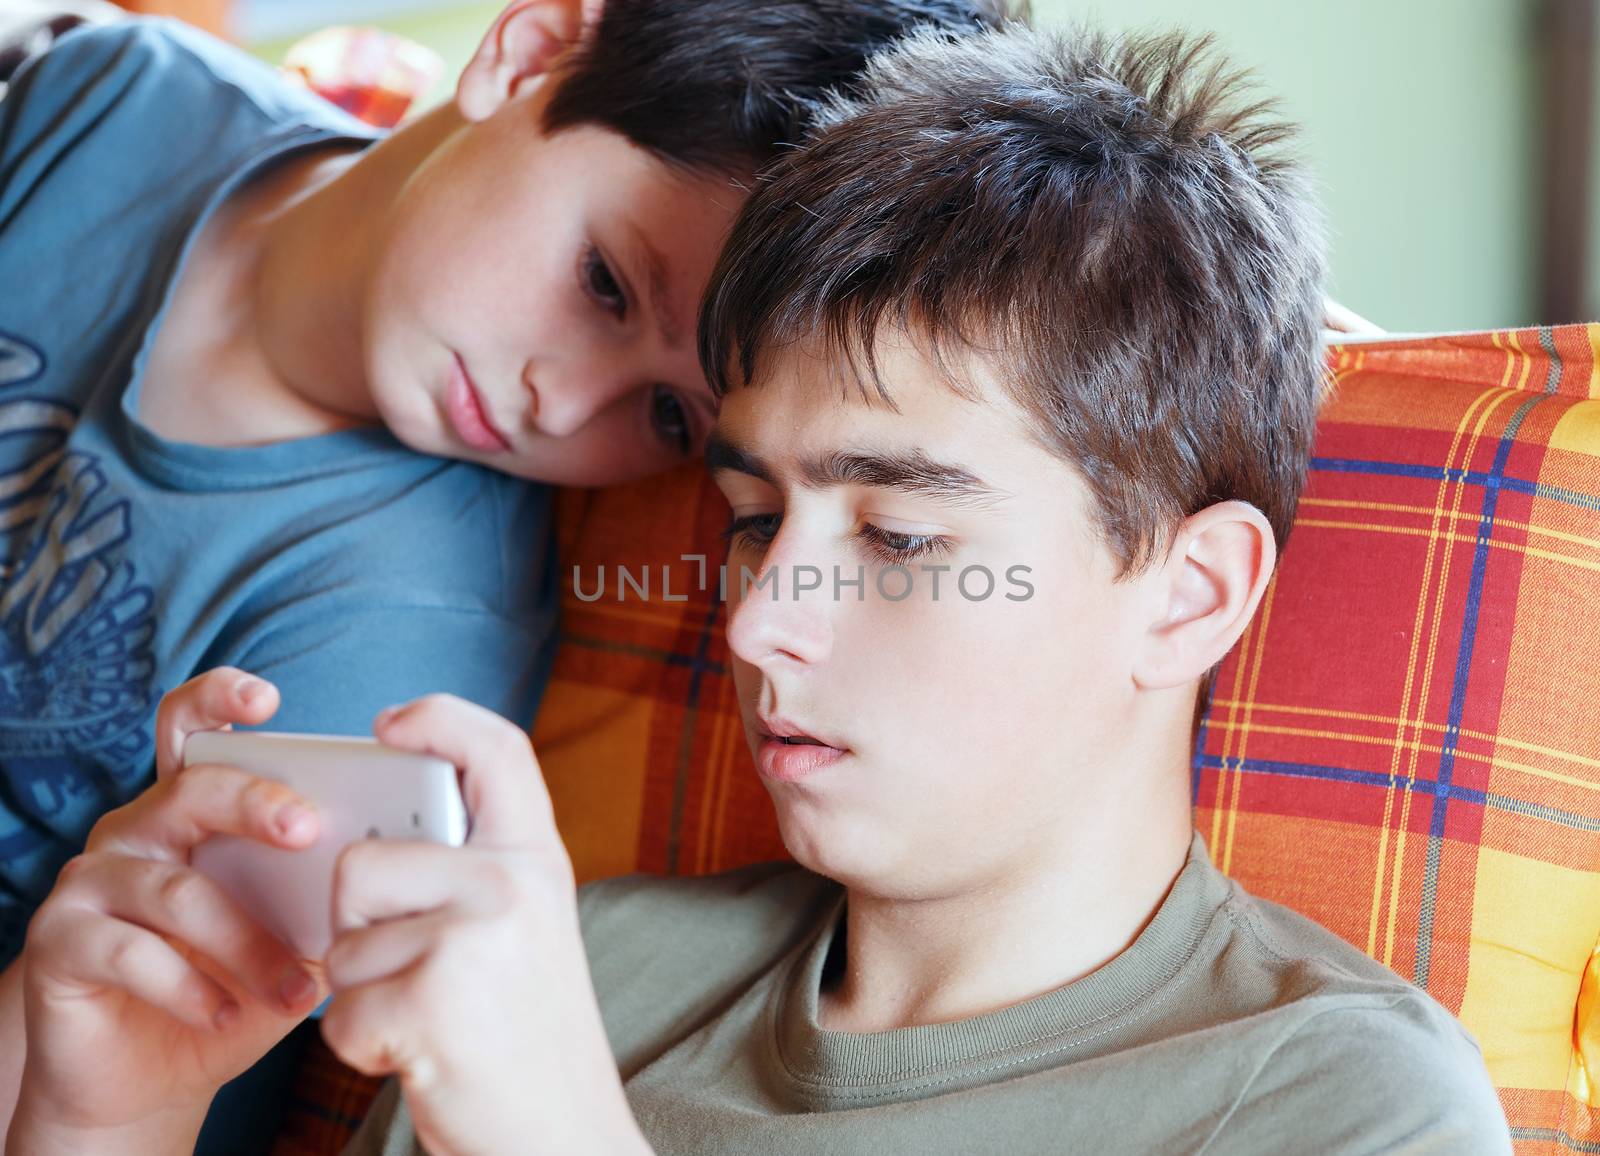 Teenager boys playing on smartphone, outdoor with shallow focus